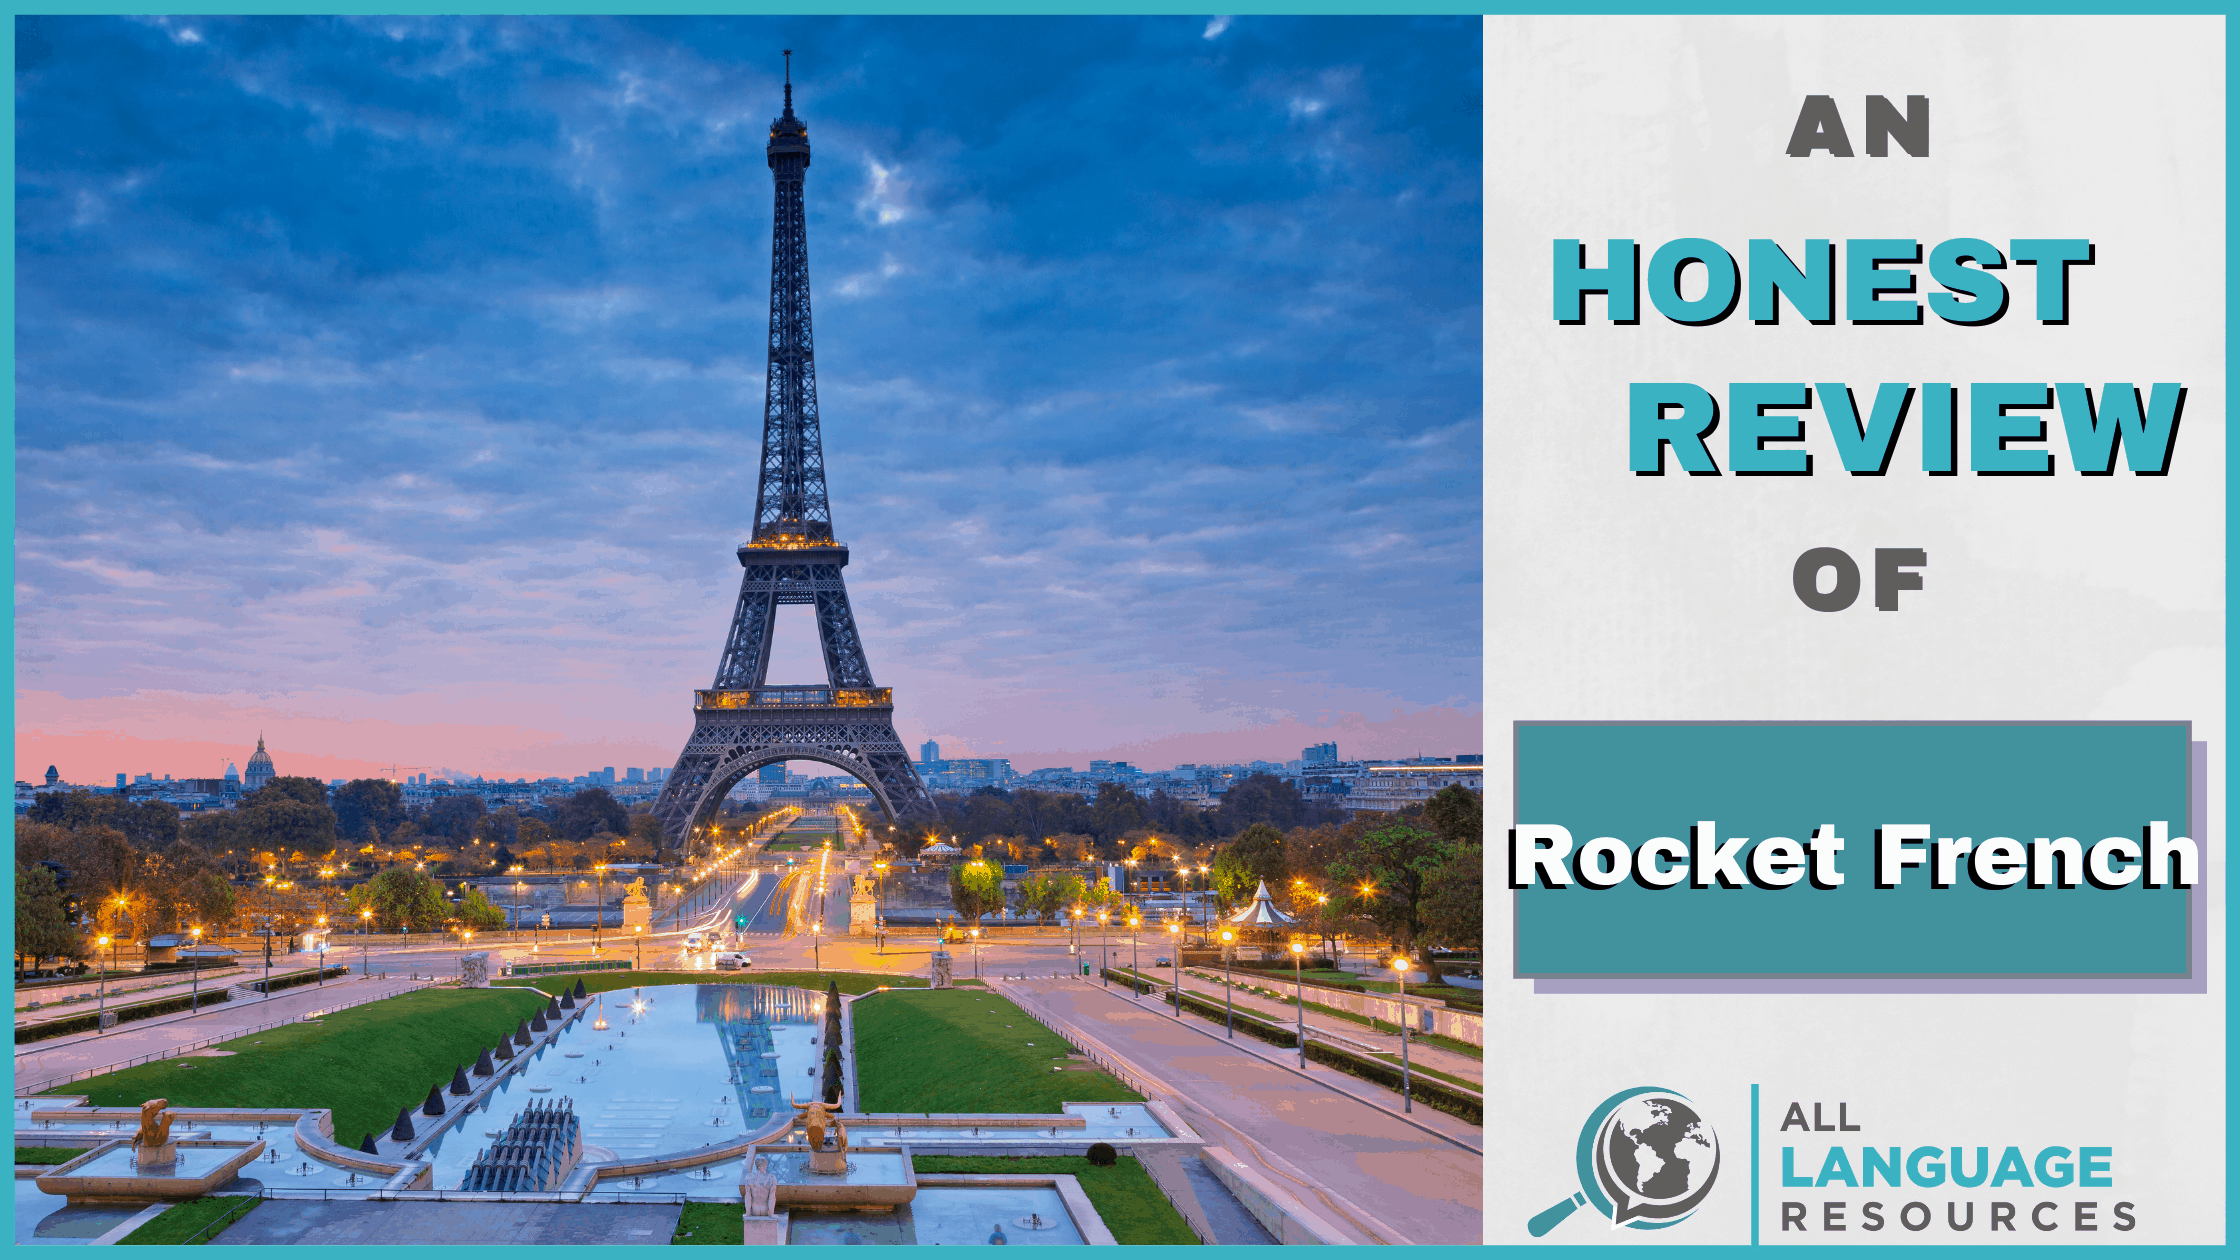 An Honest Review of Rocket French With Image of The Eiffel Tower